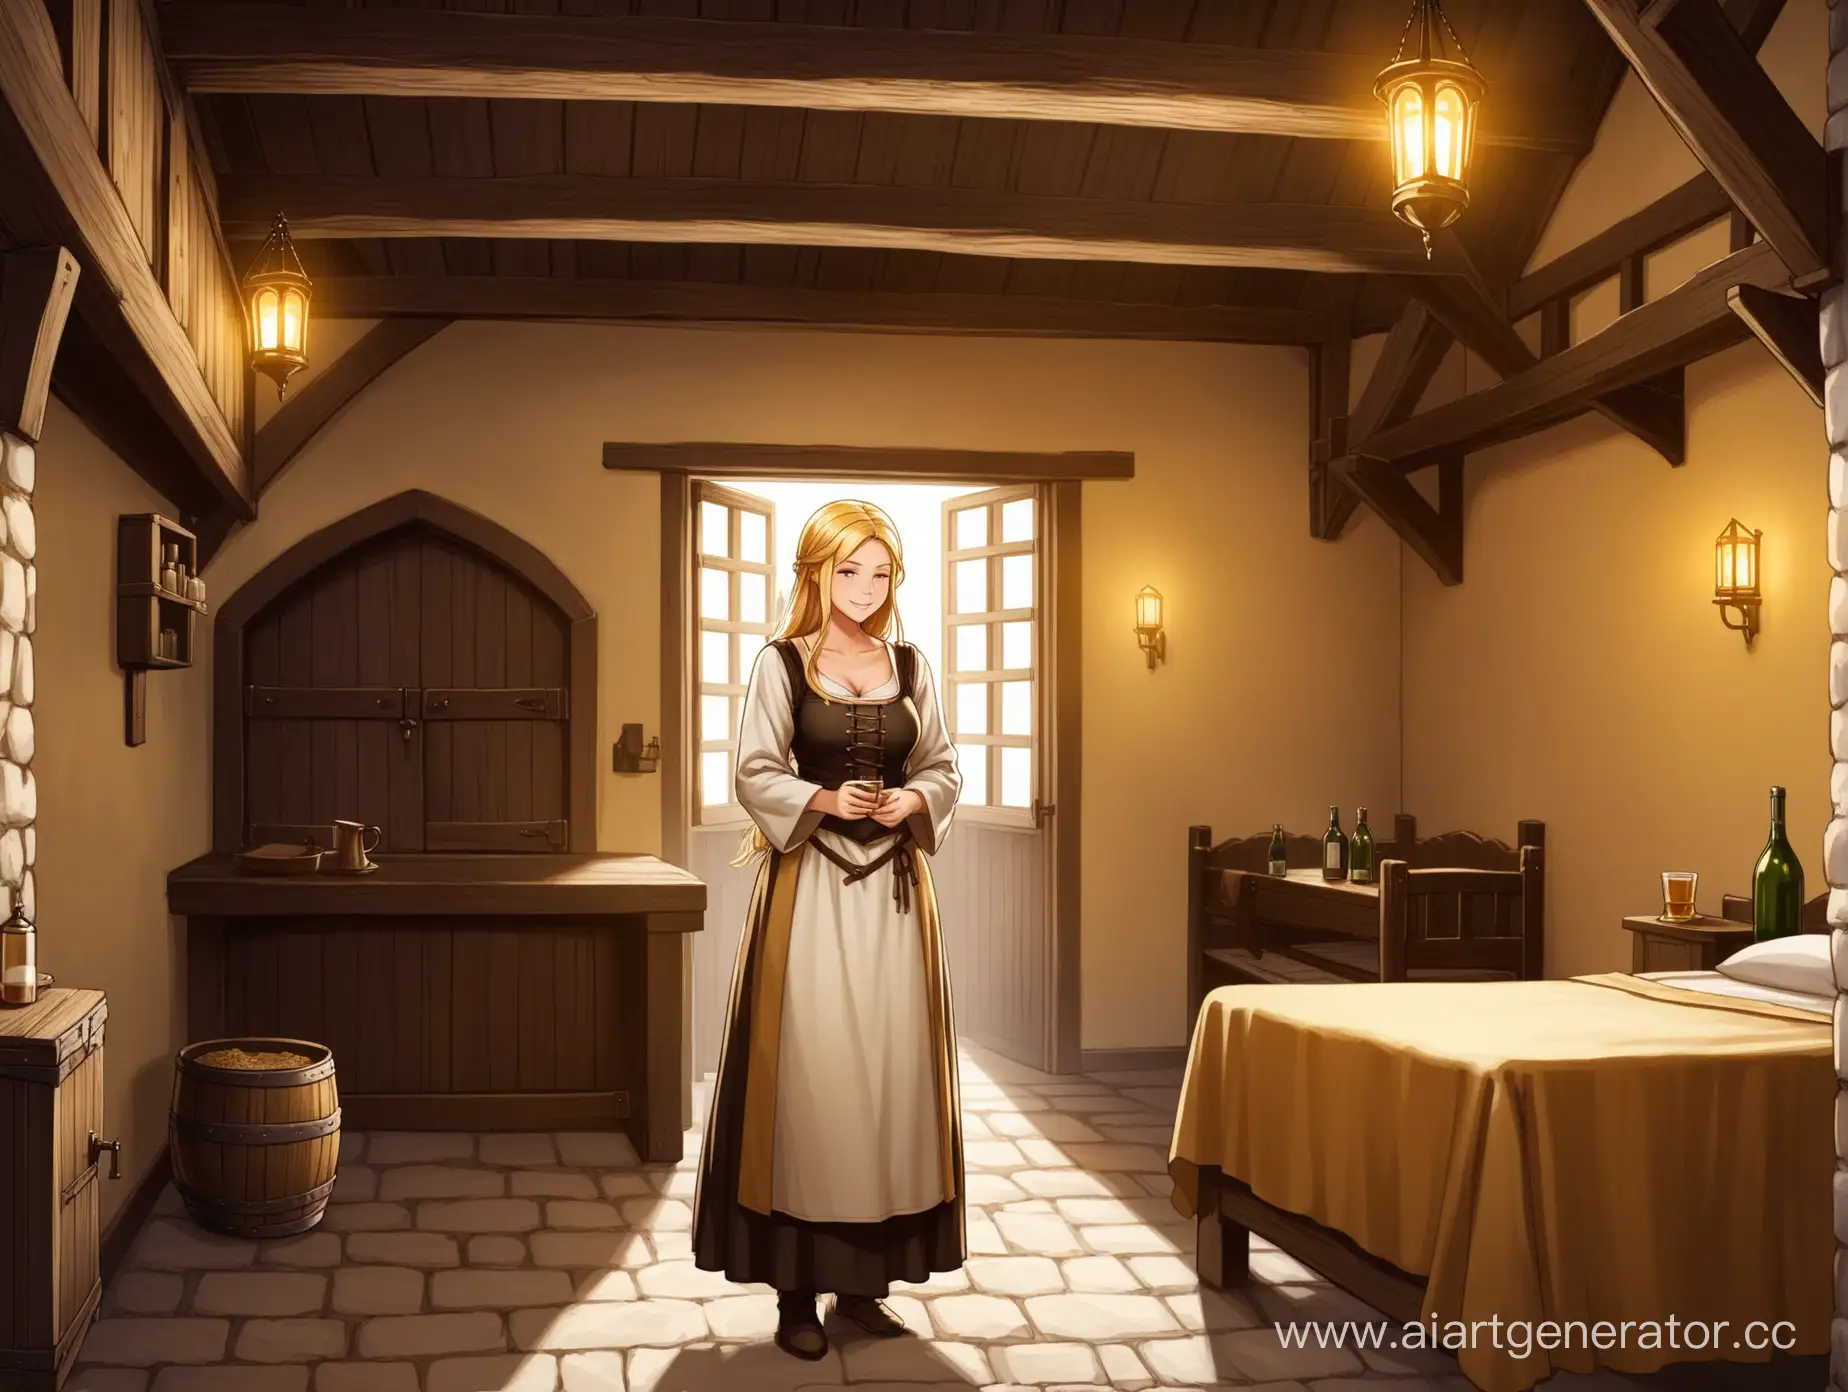 GoldenHaired-Innkeeper-Welcoming-Guests-to-a-Medieval-Inn